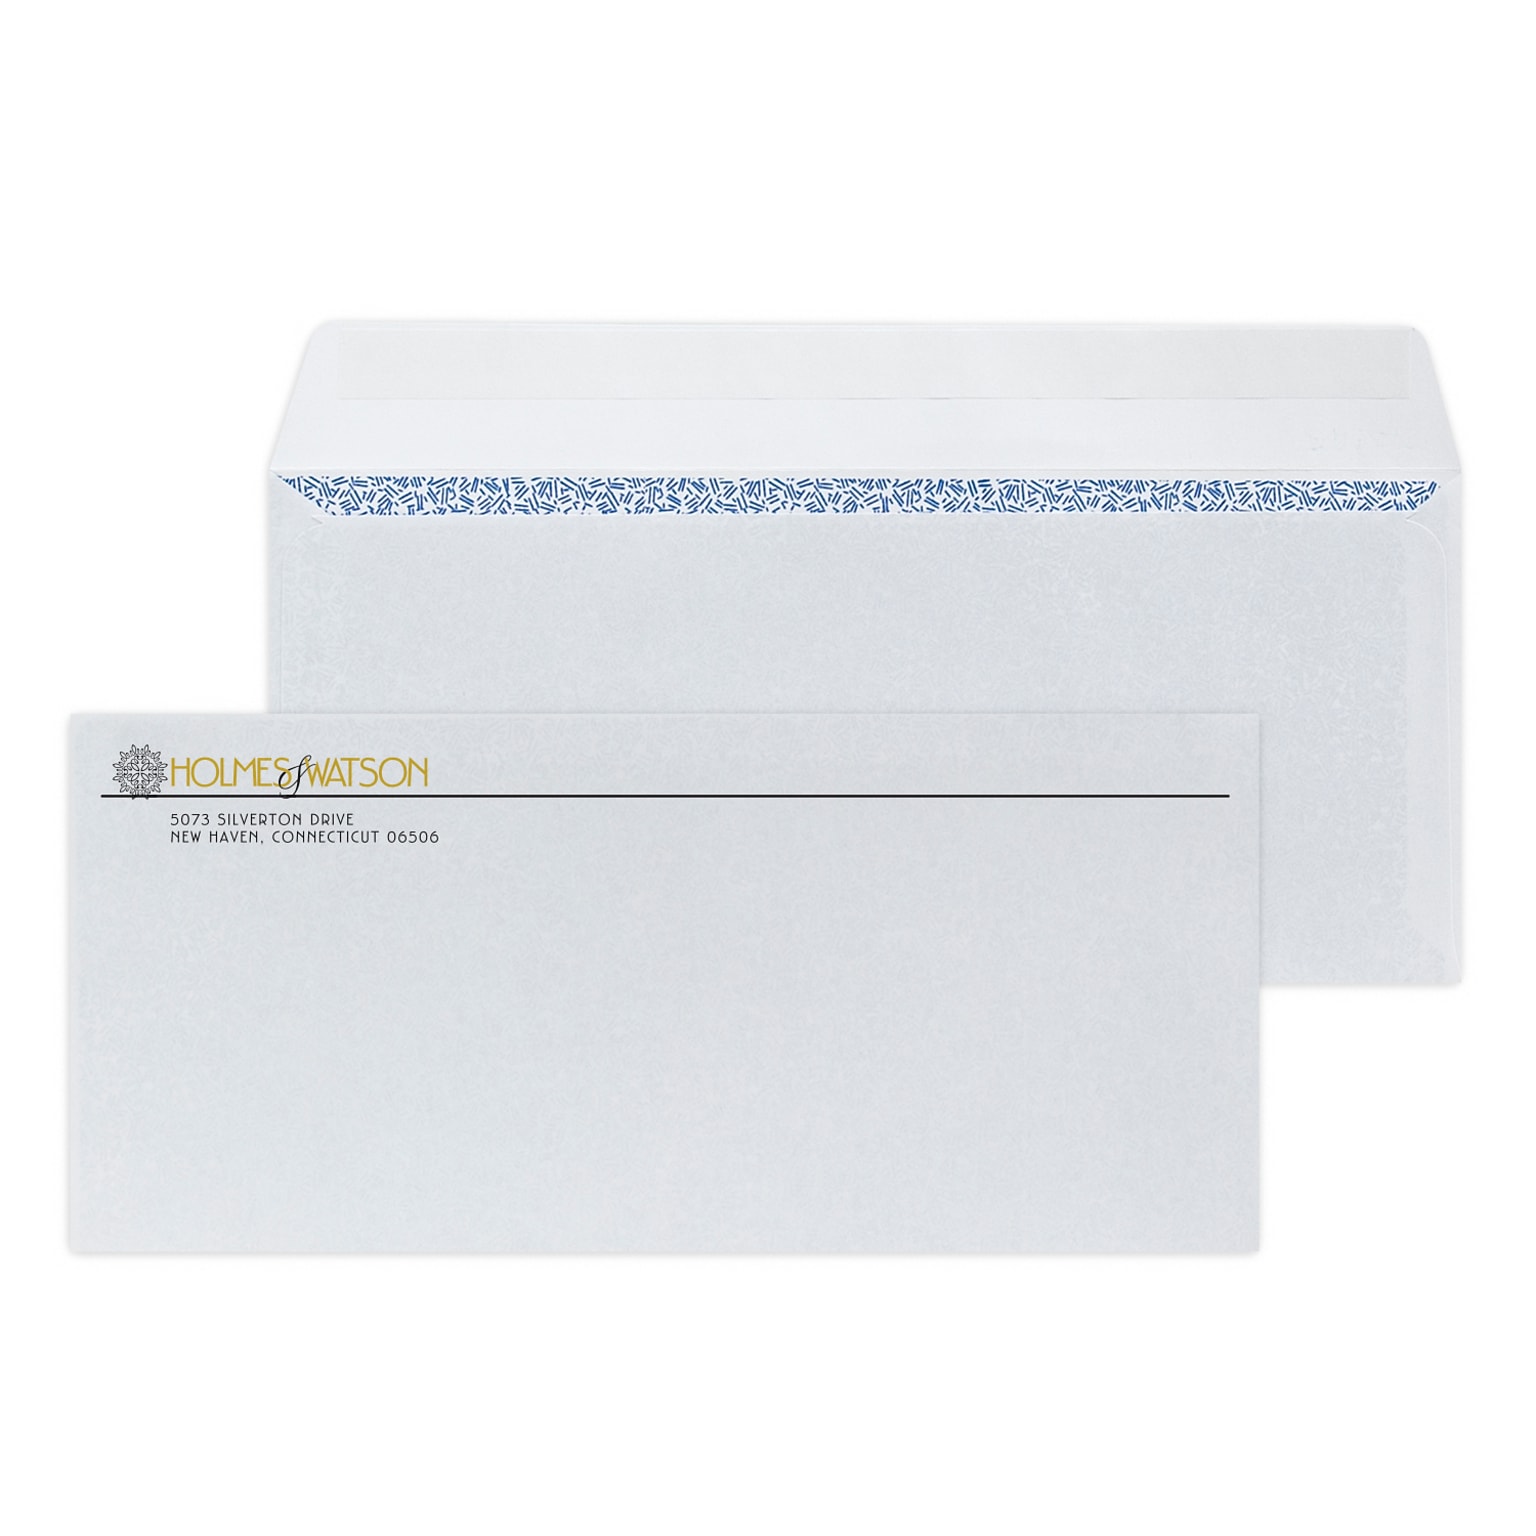 Custom #10 Peel and Seal Envelopes with Security Tint, 4 1/4 x 9 1/2, 24# White Wove, 1 Standard and 1 Custom Inks, 250 / Pack